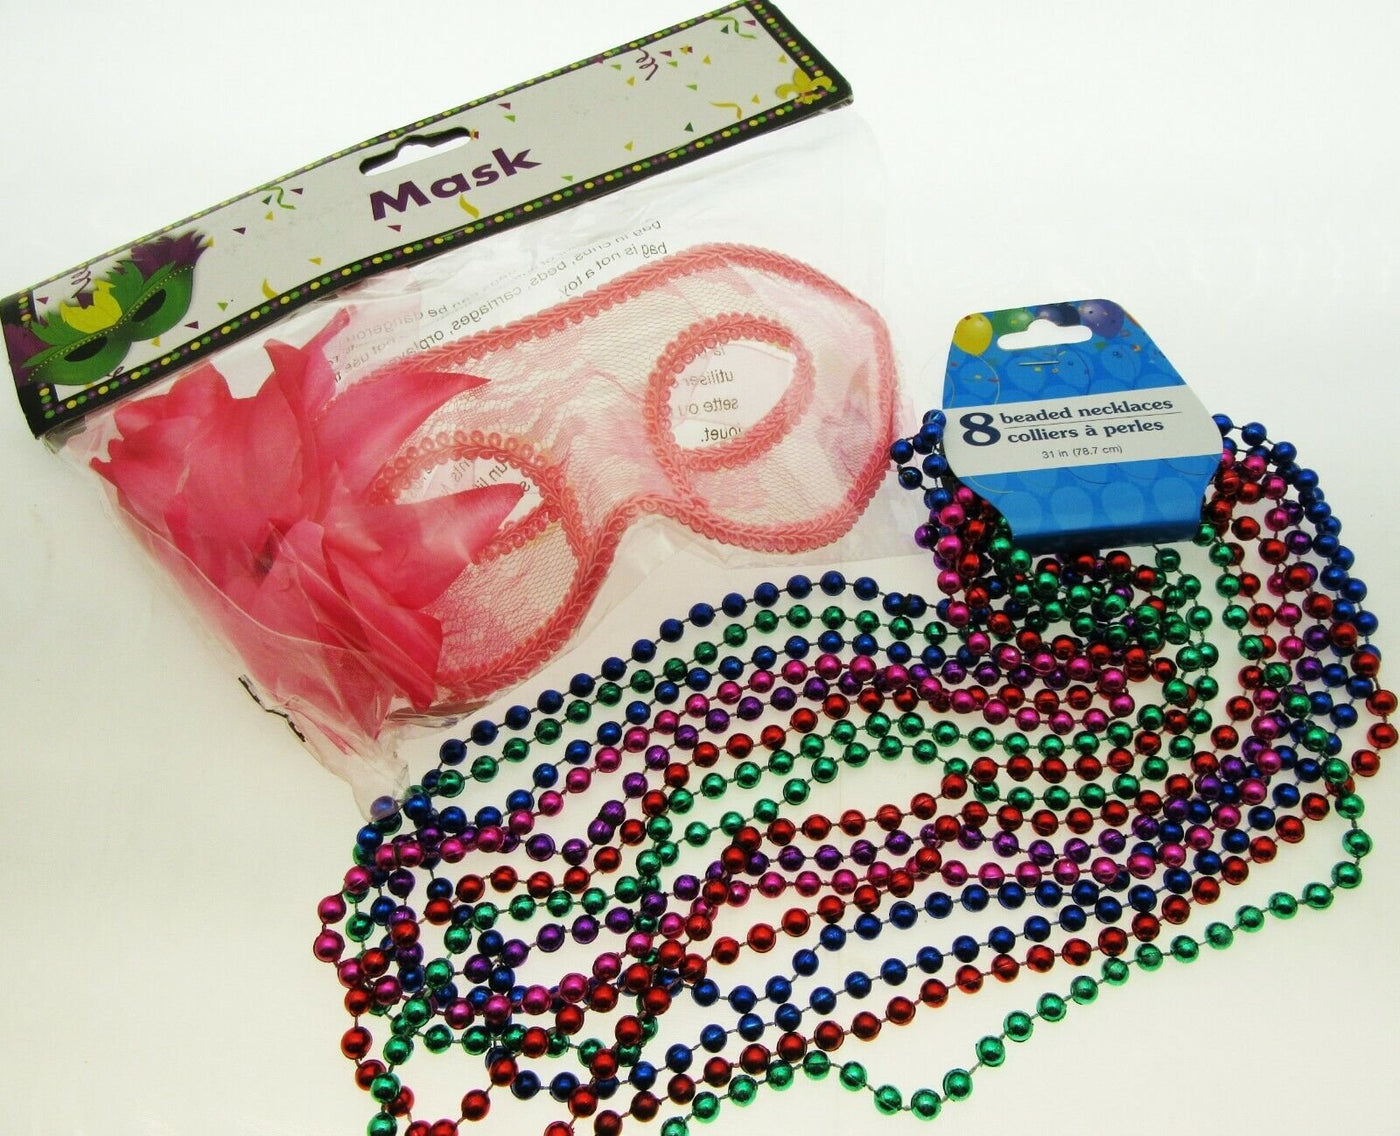 Mardi Gras Eye Mask & Necklaces Costume Mascaraed Parade New Orleans Pink Party